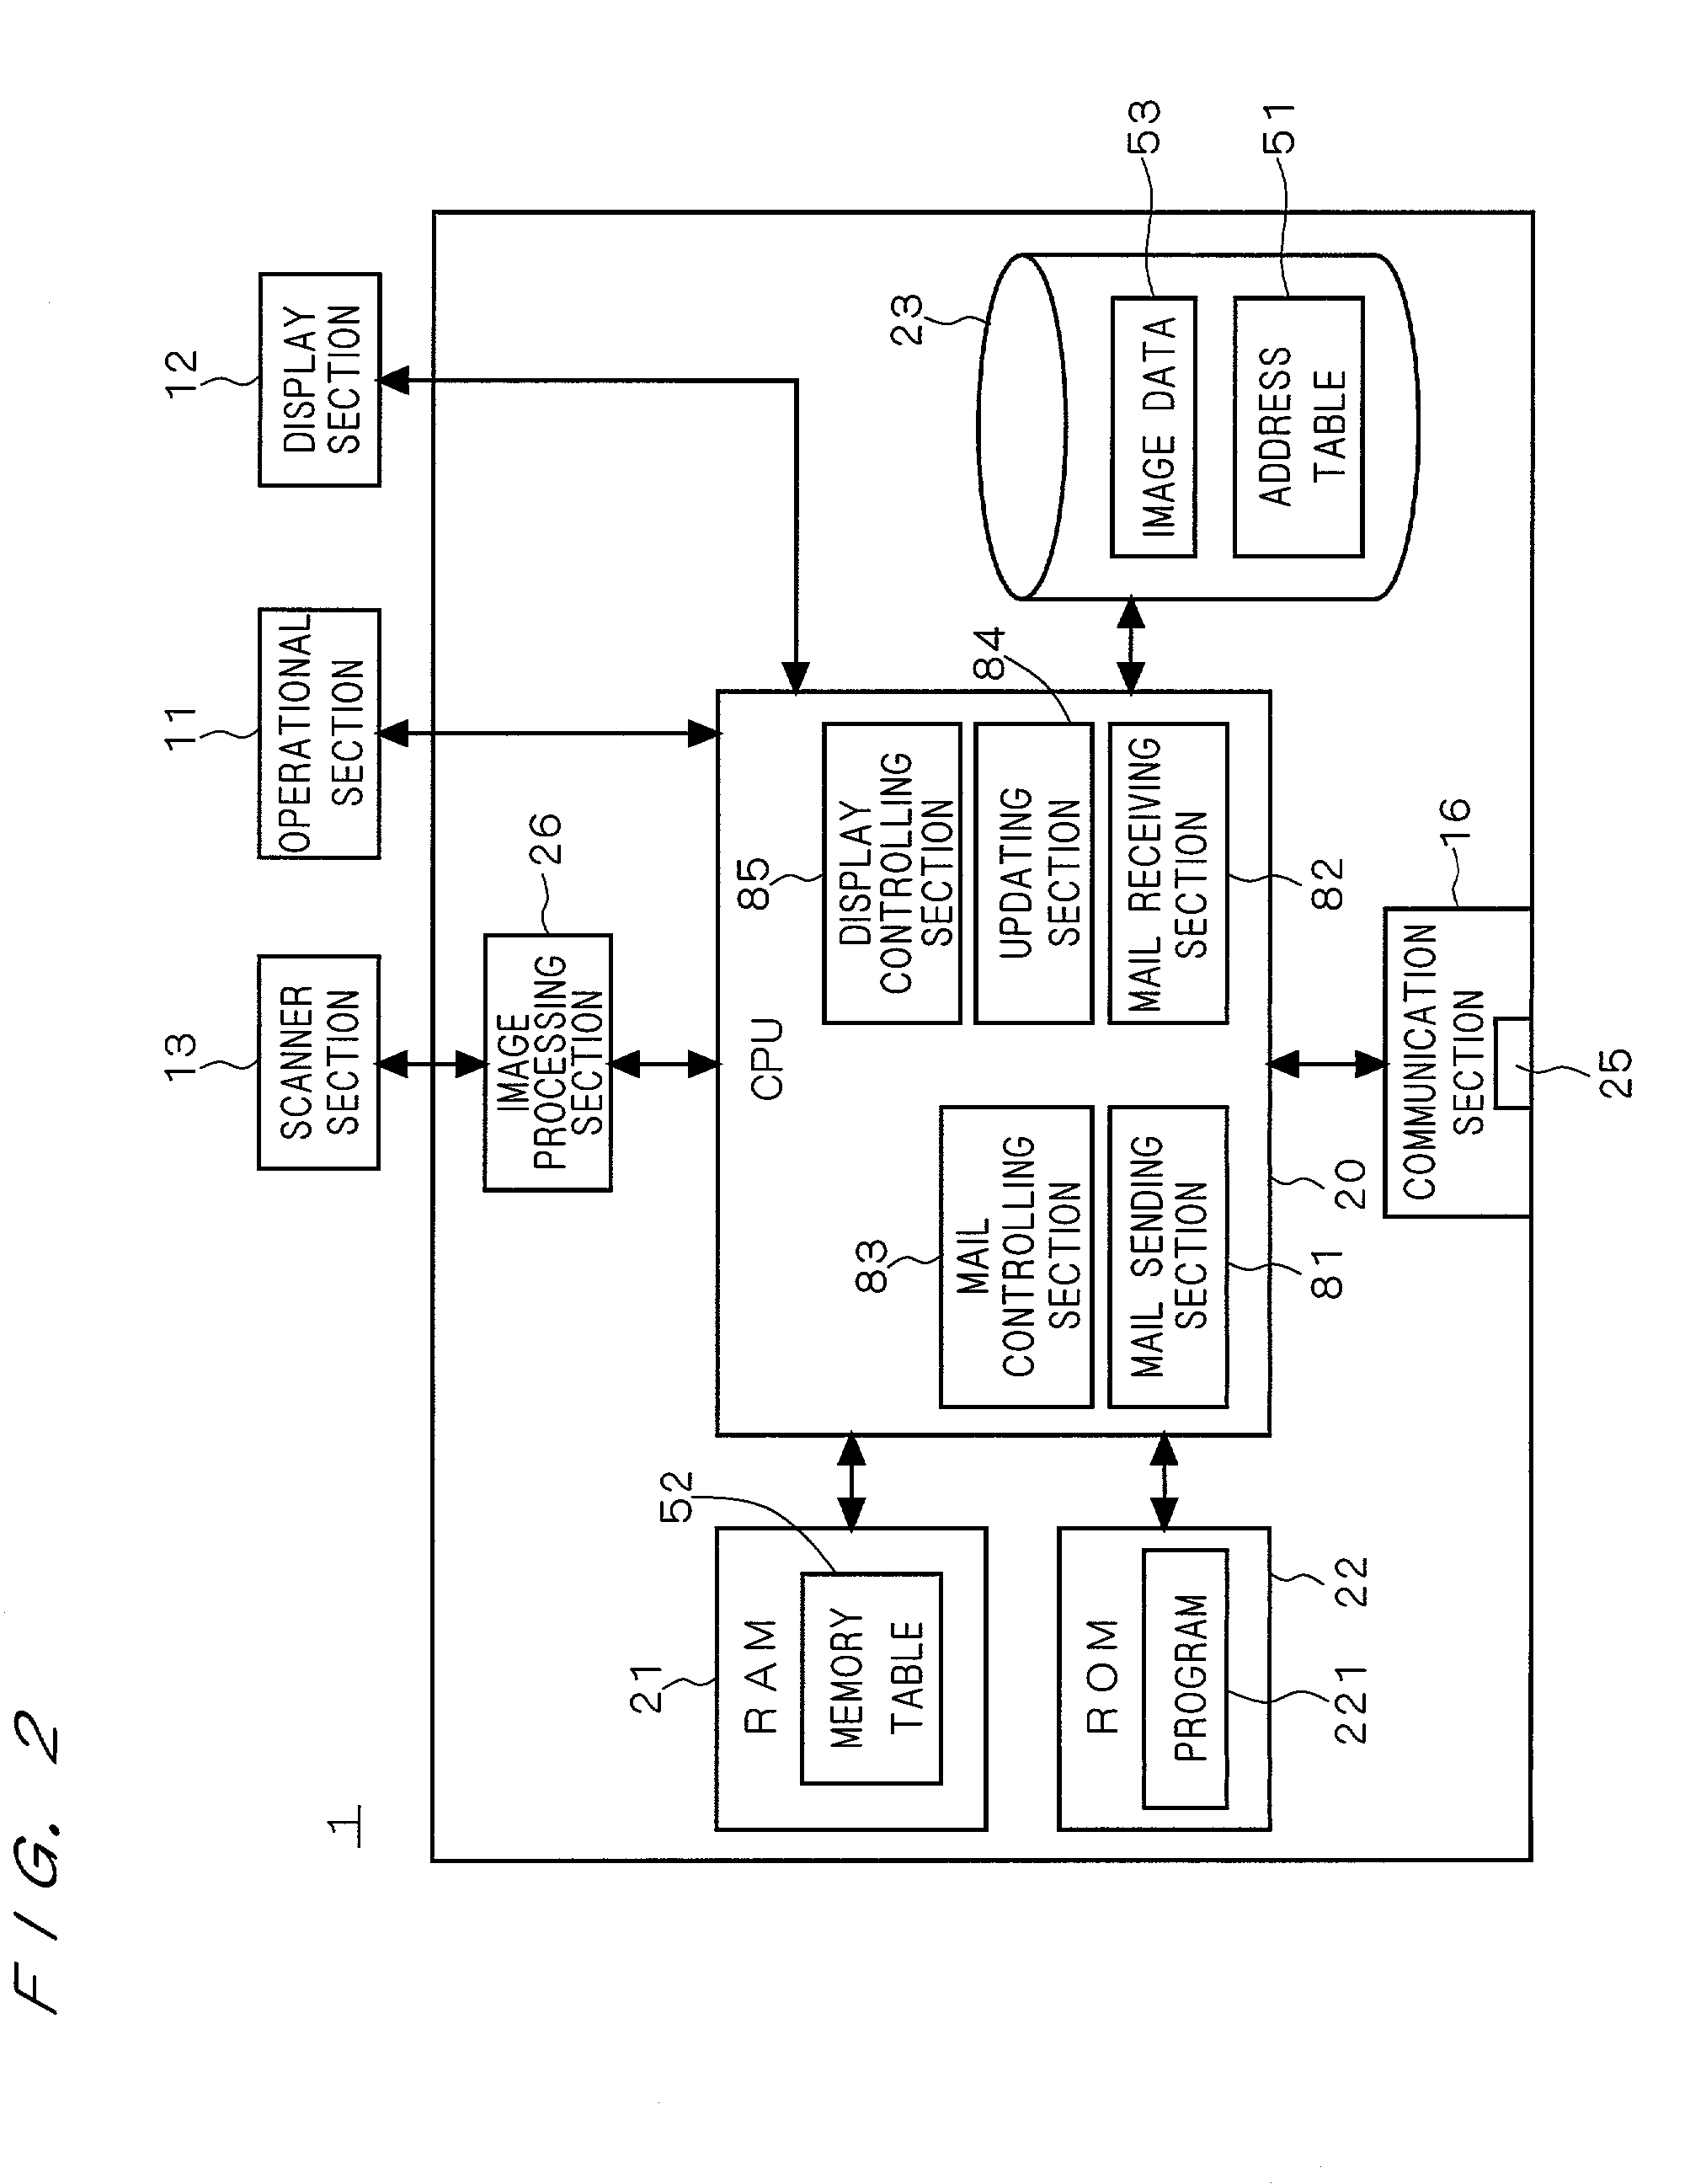 Electronic mail sending apparatus and method